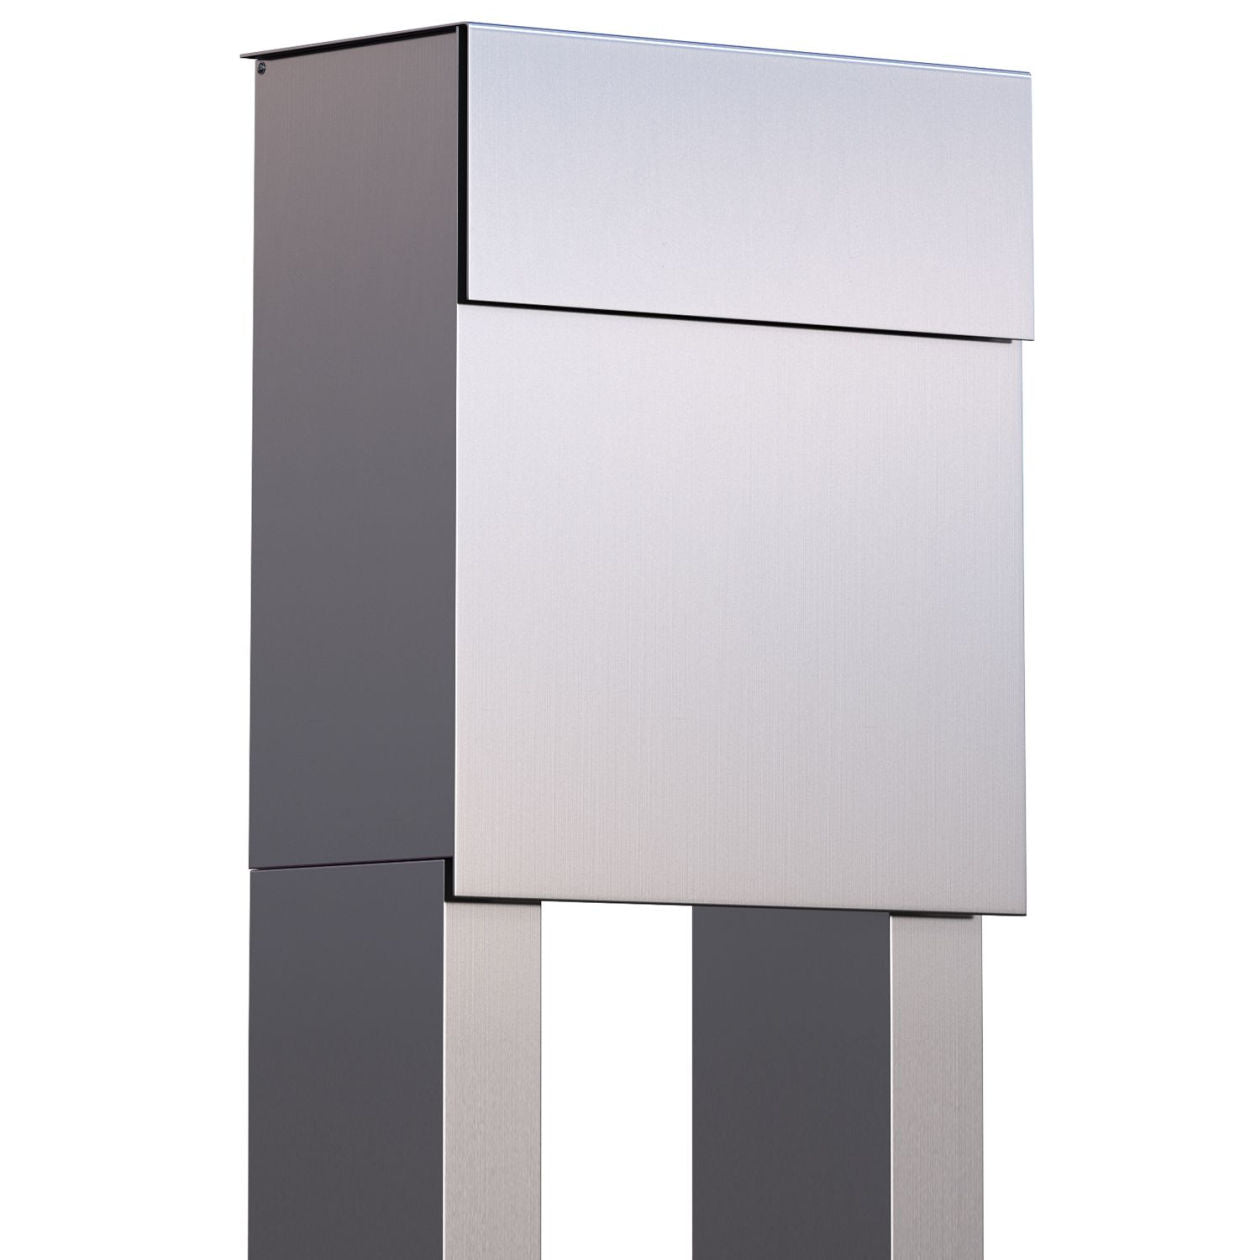 STAND ALTO by Bravios - Modern post-mounted stainless steel mailbox